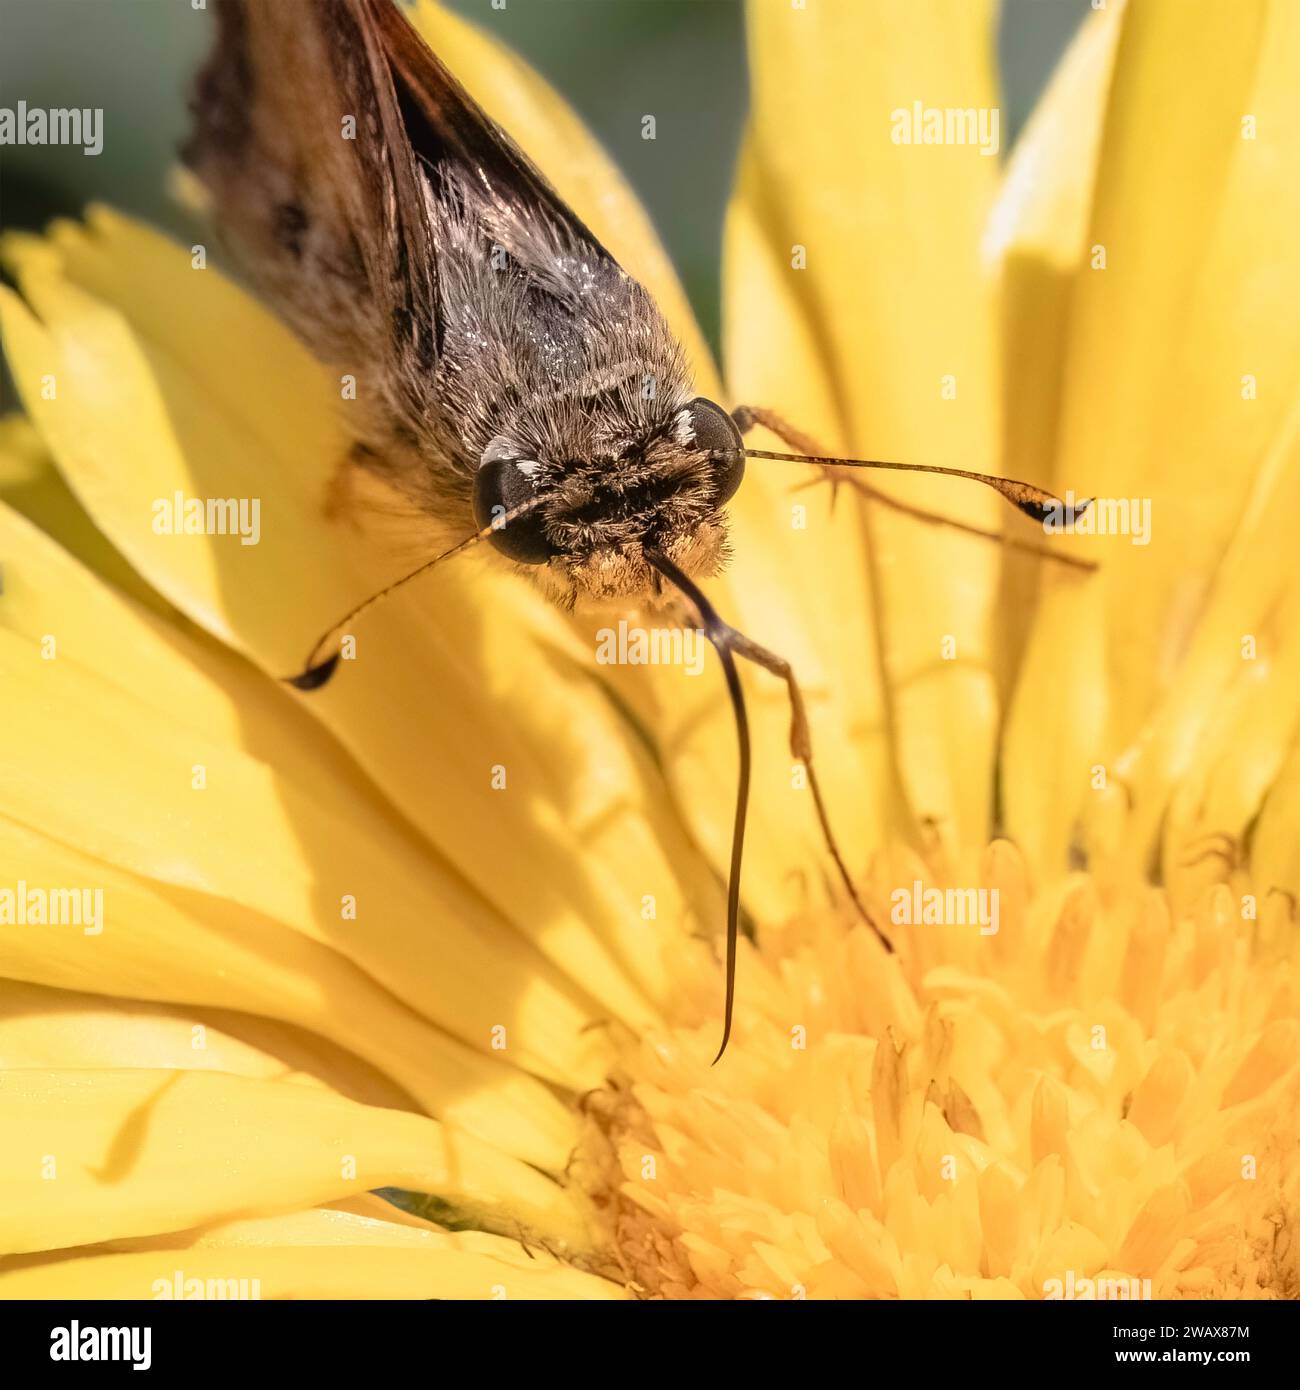 Frontal view of a tan and brown skipper butterfly using its long tongue to sip nectar from a yellow calendula flower. Long Island, New York, USA Stock Photo